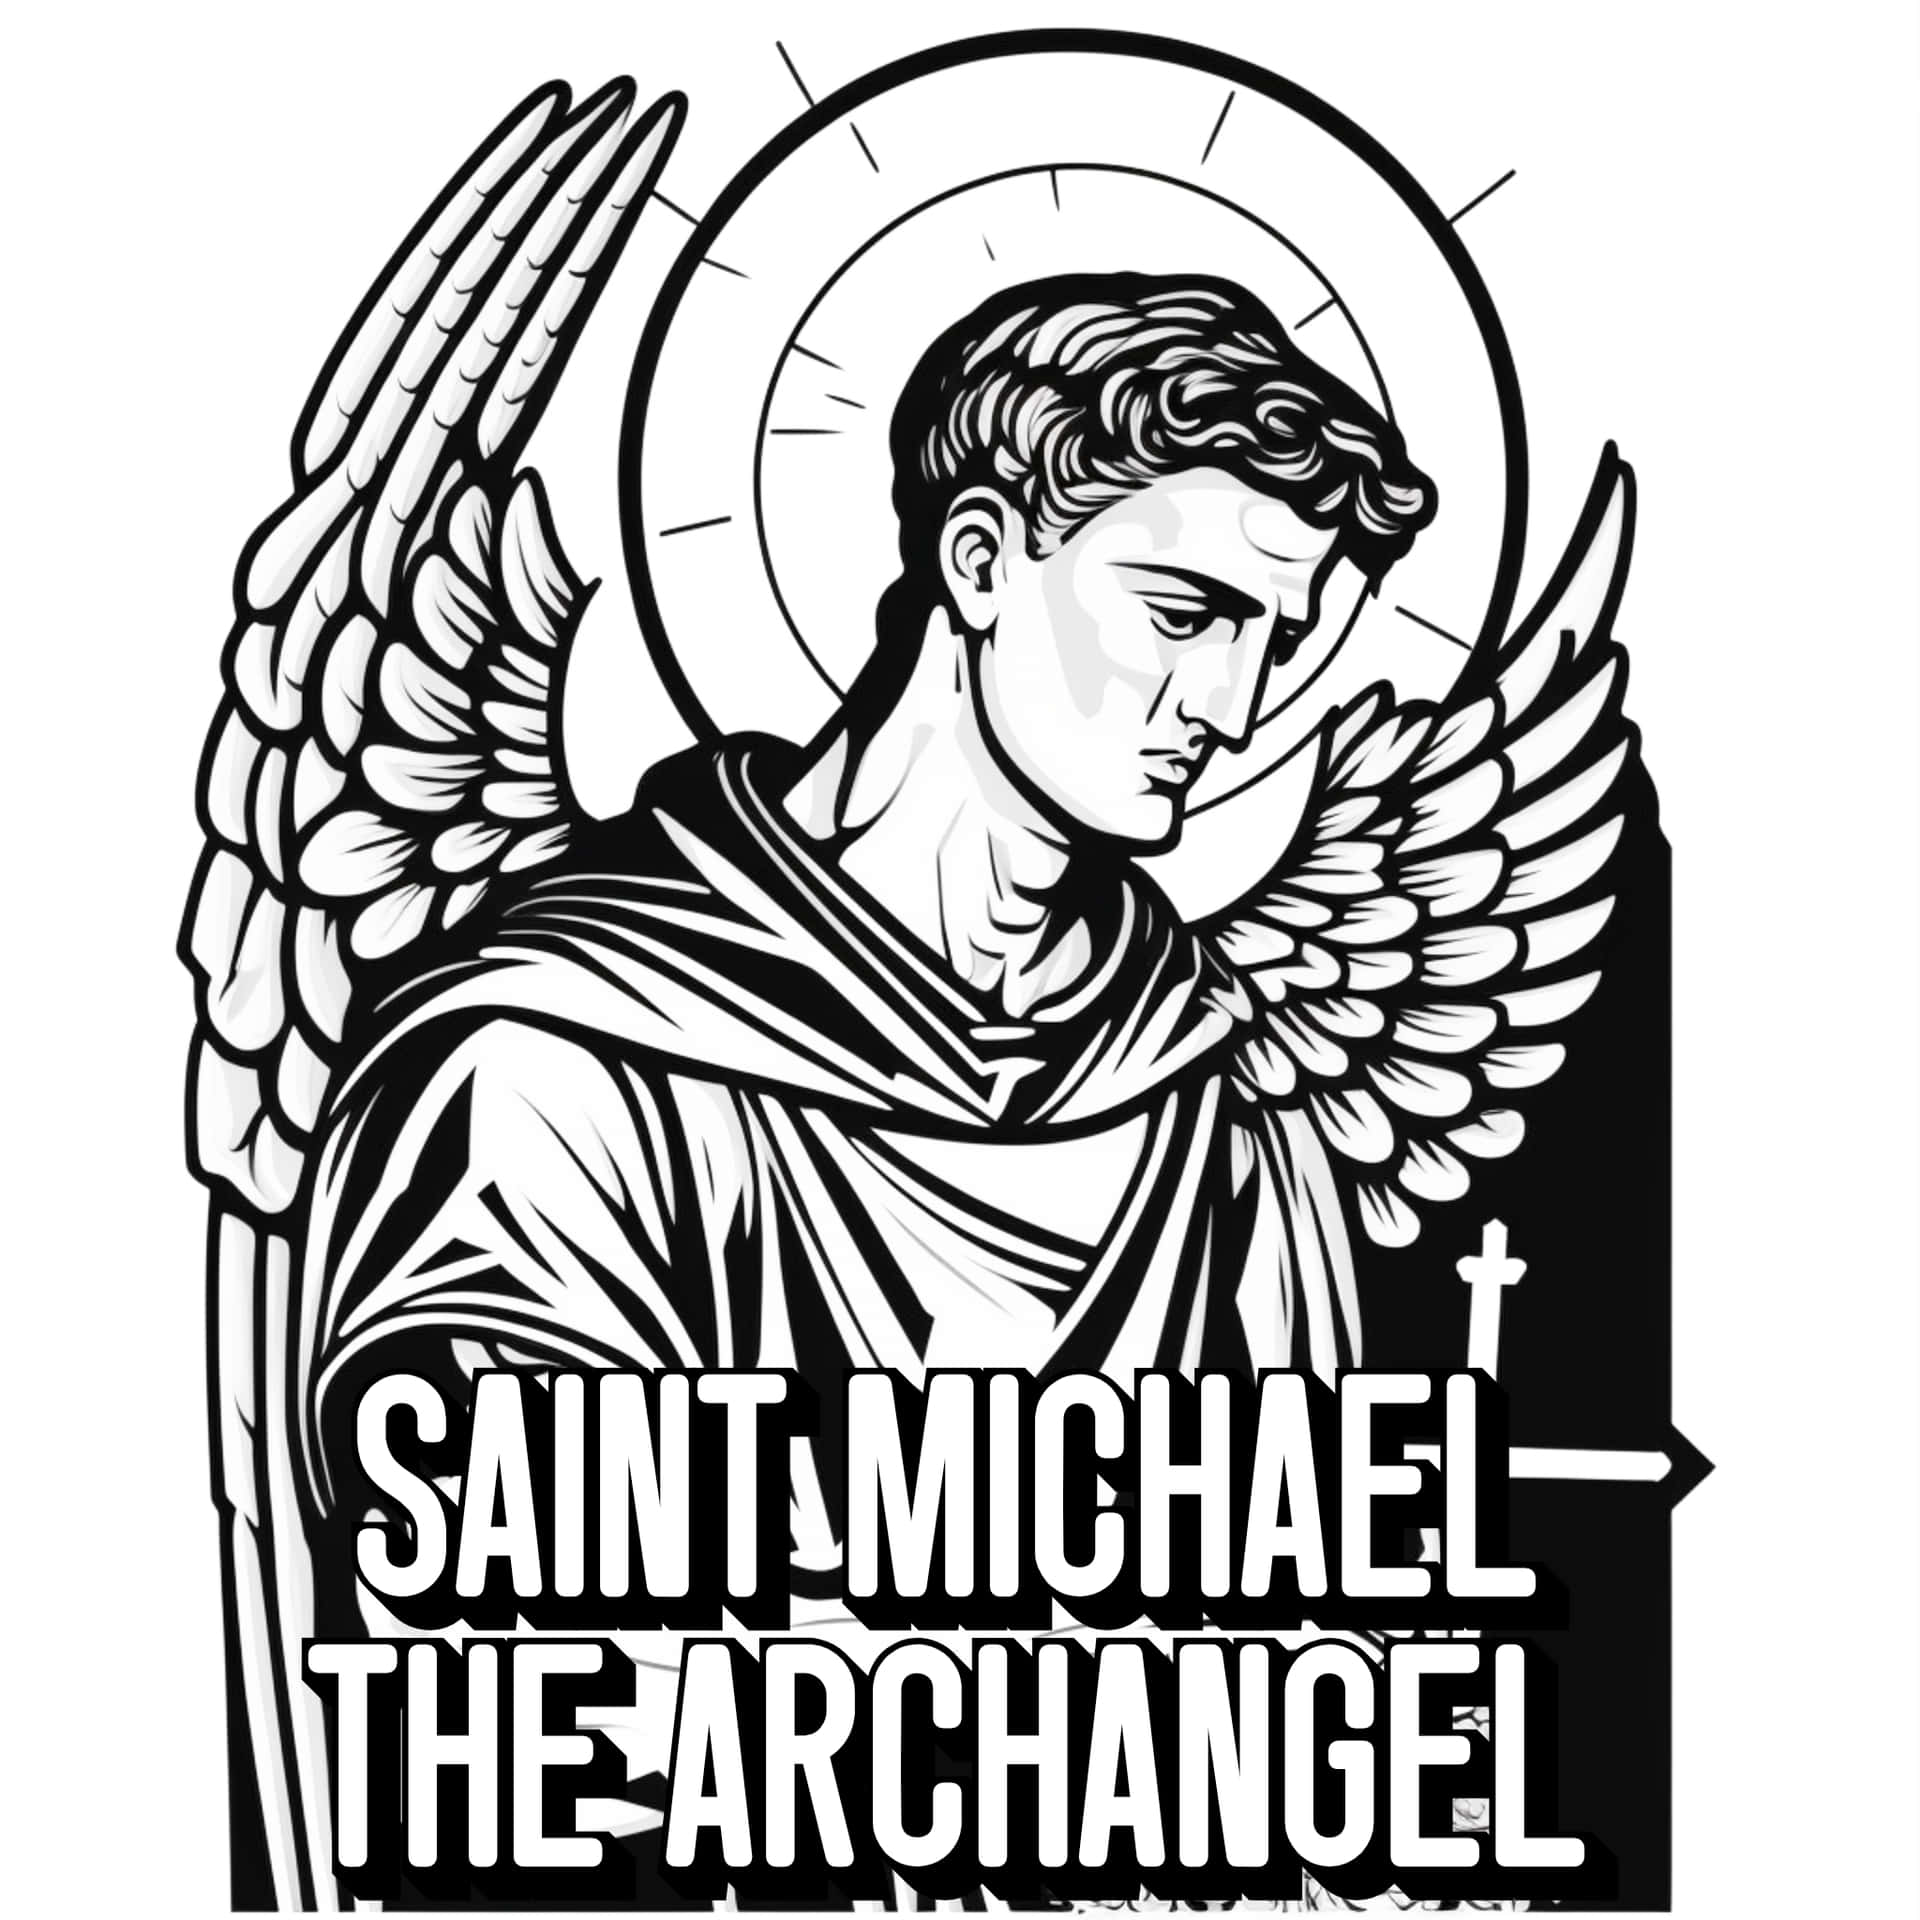 Saint Michael, The Archangel in all His Glory